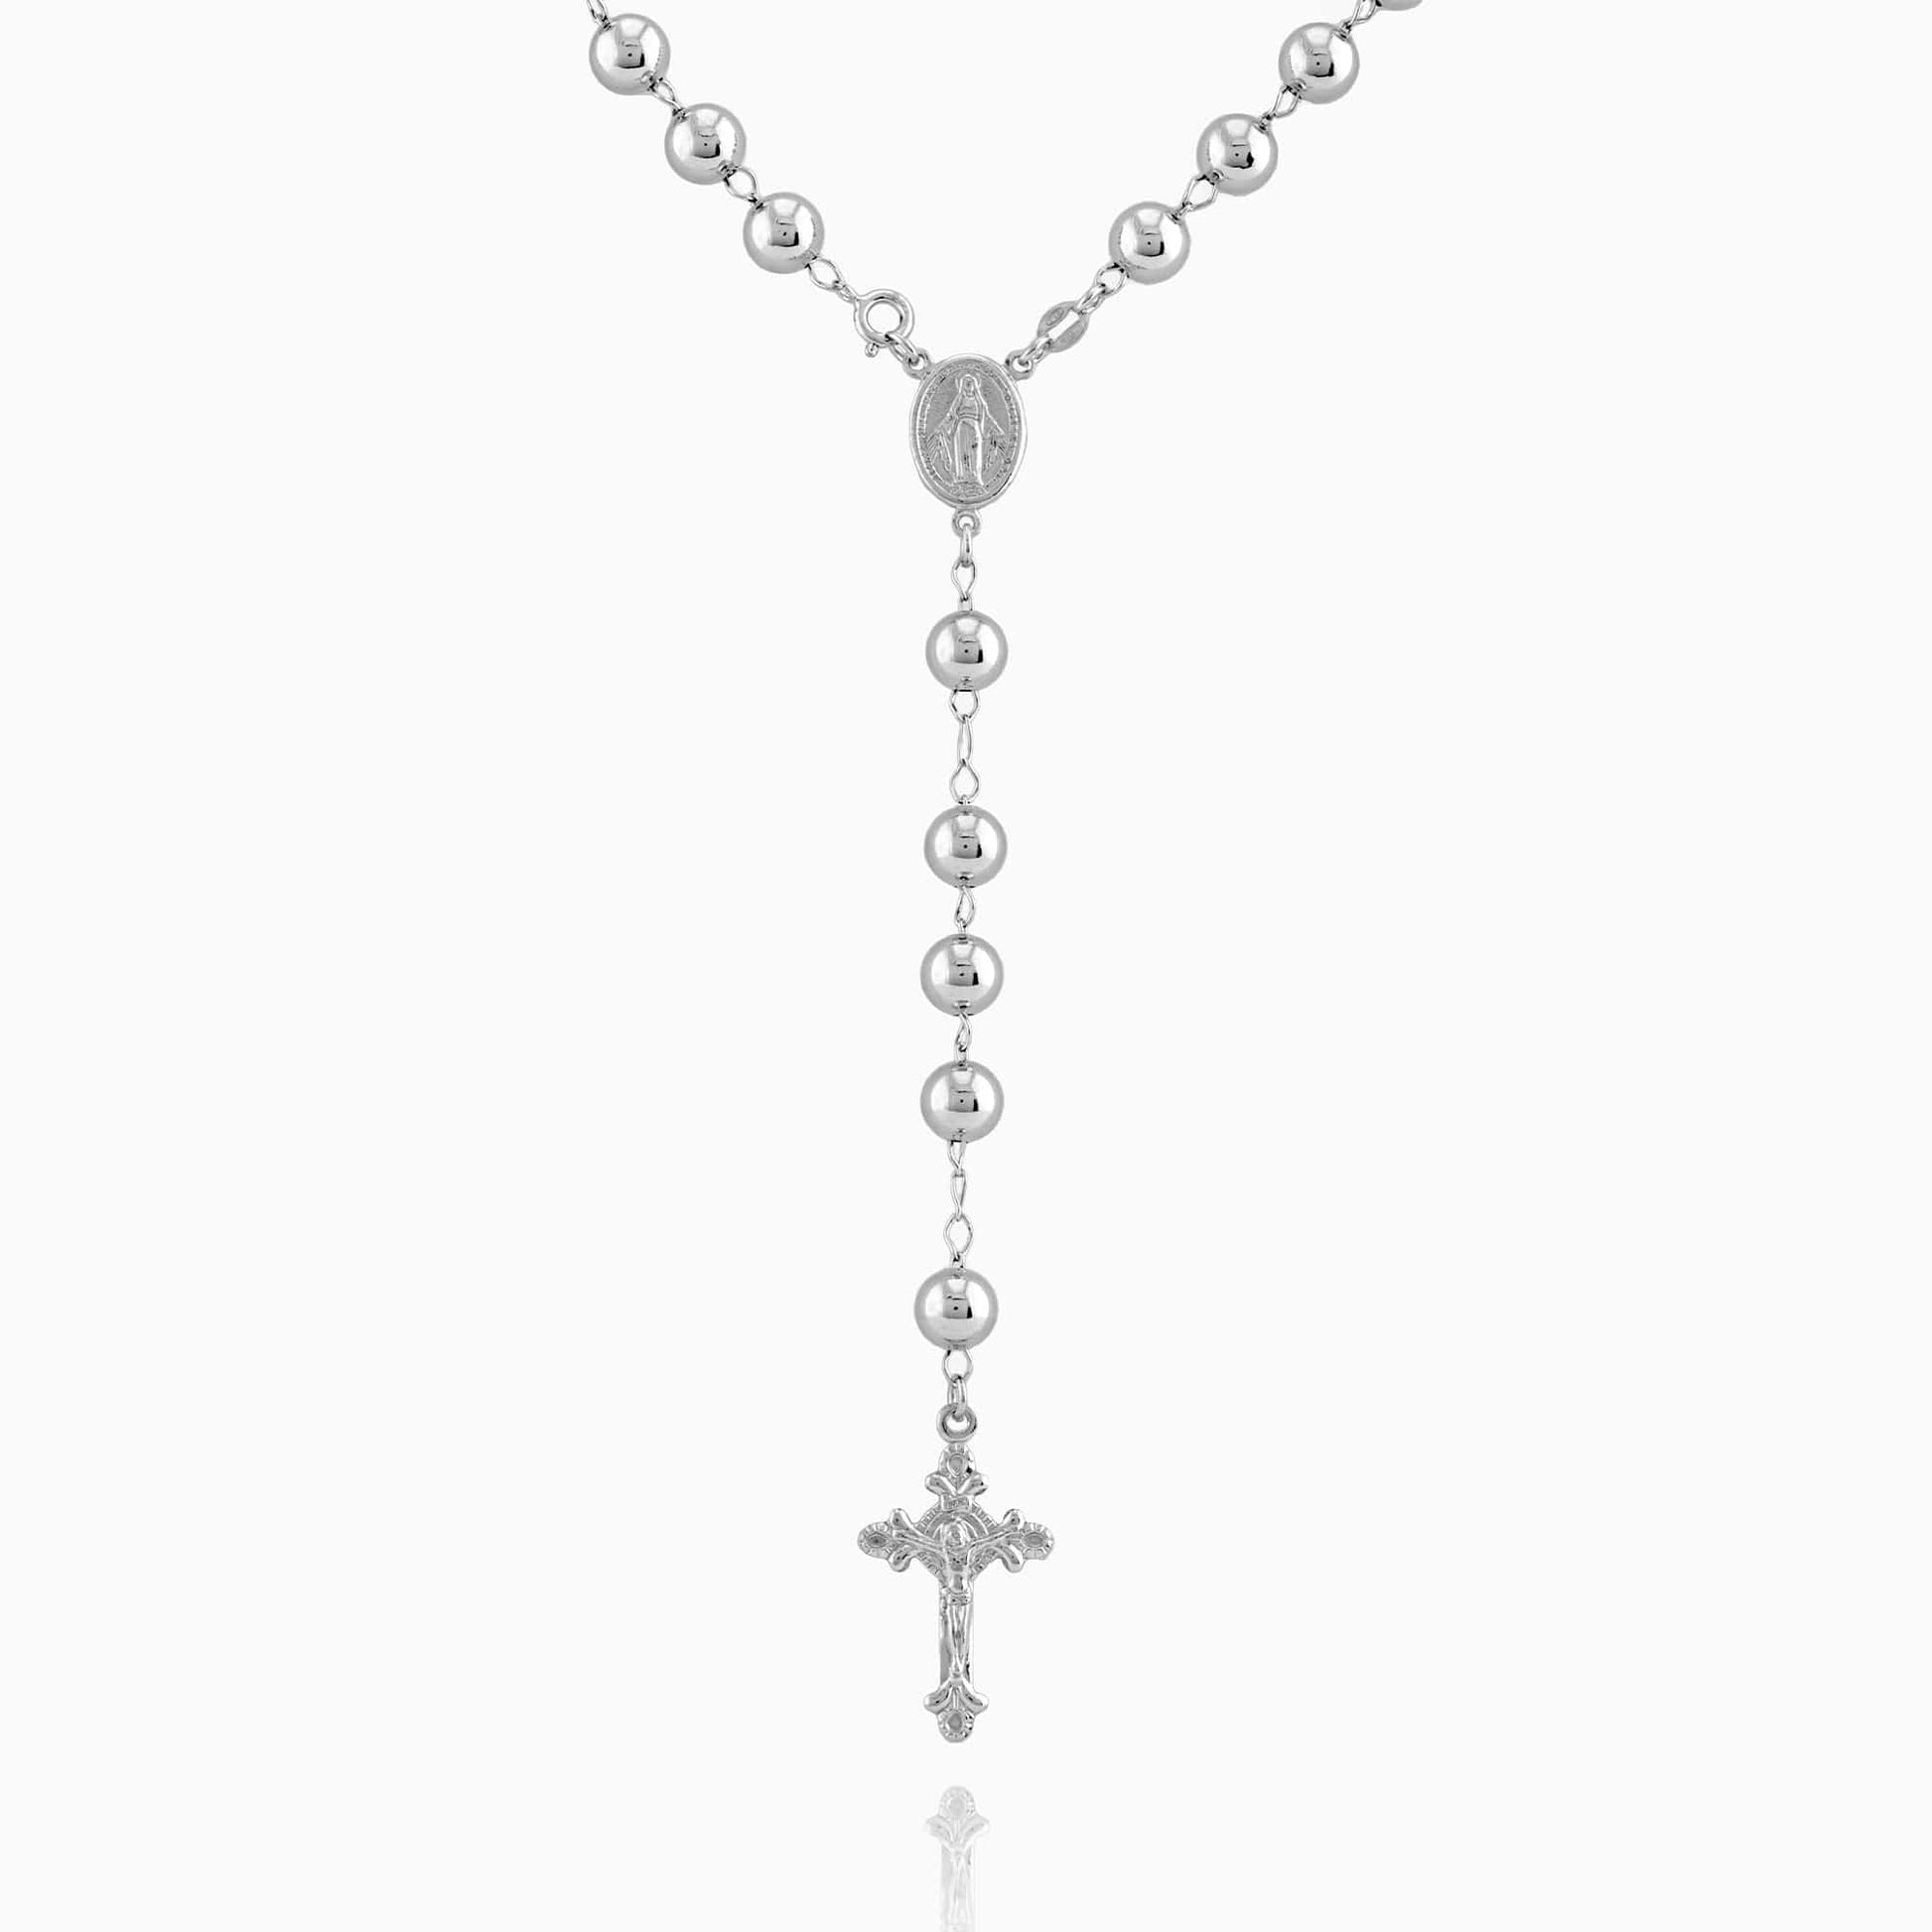 MONDO CATTOLICO Prayer Beads Rhodium / Cm 50 (19.7 in) MIRACULOUS MARY ROSARY WITH 8 MM BEADS